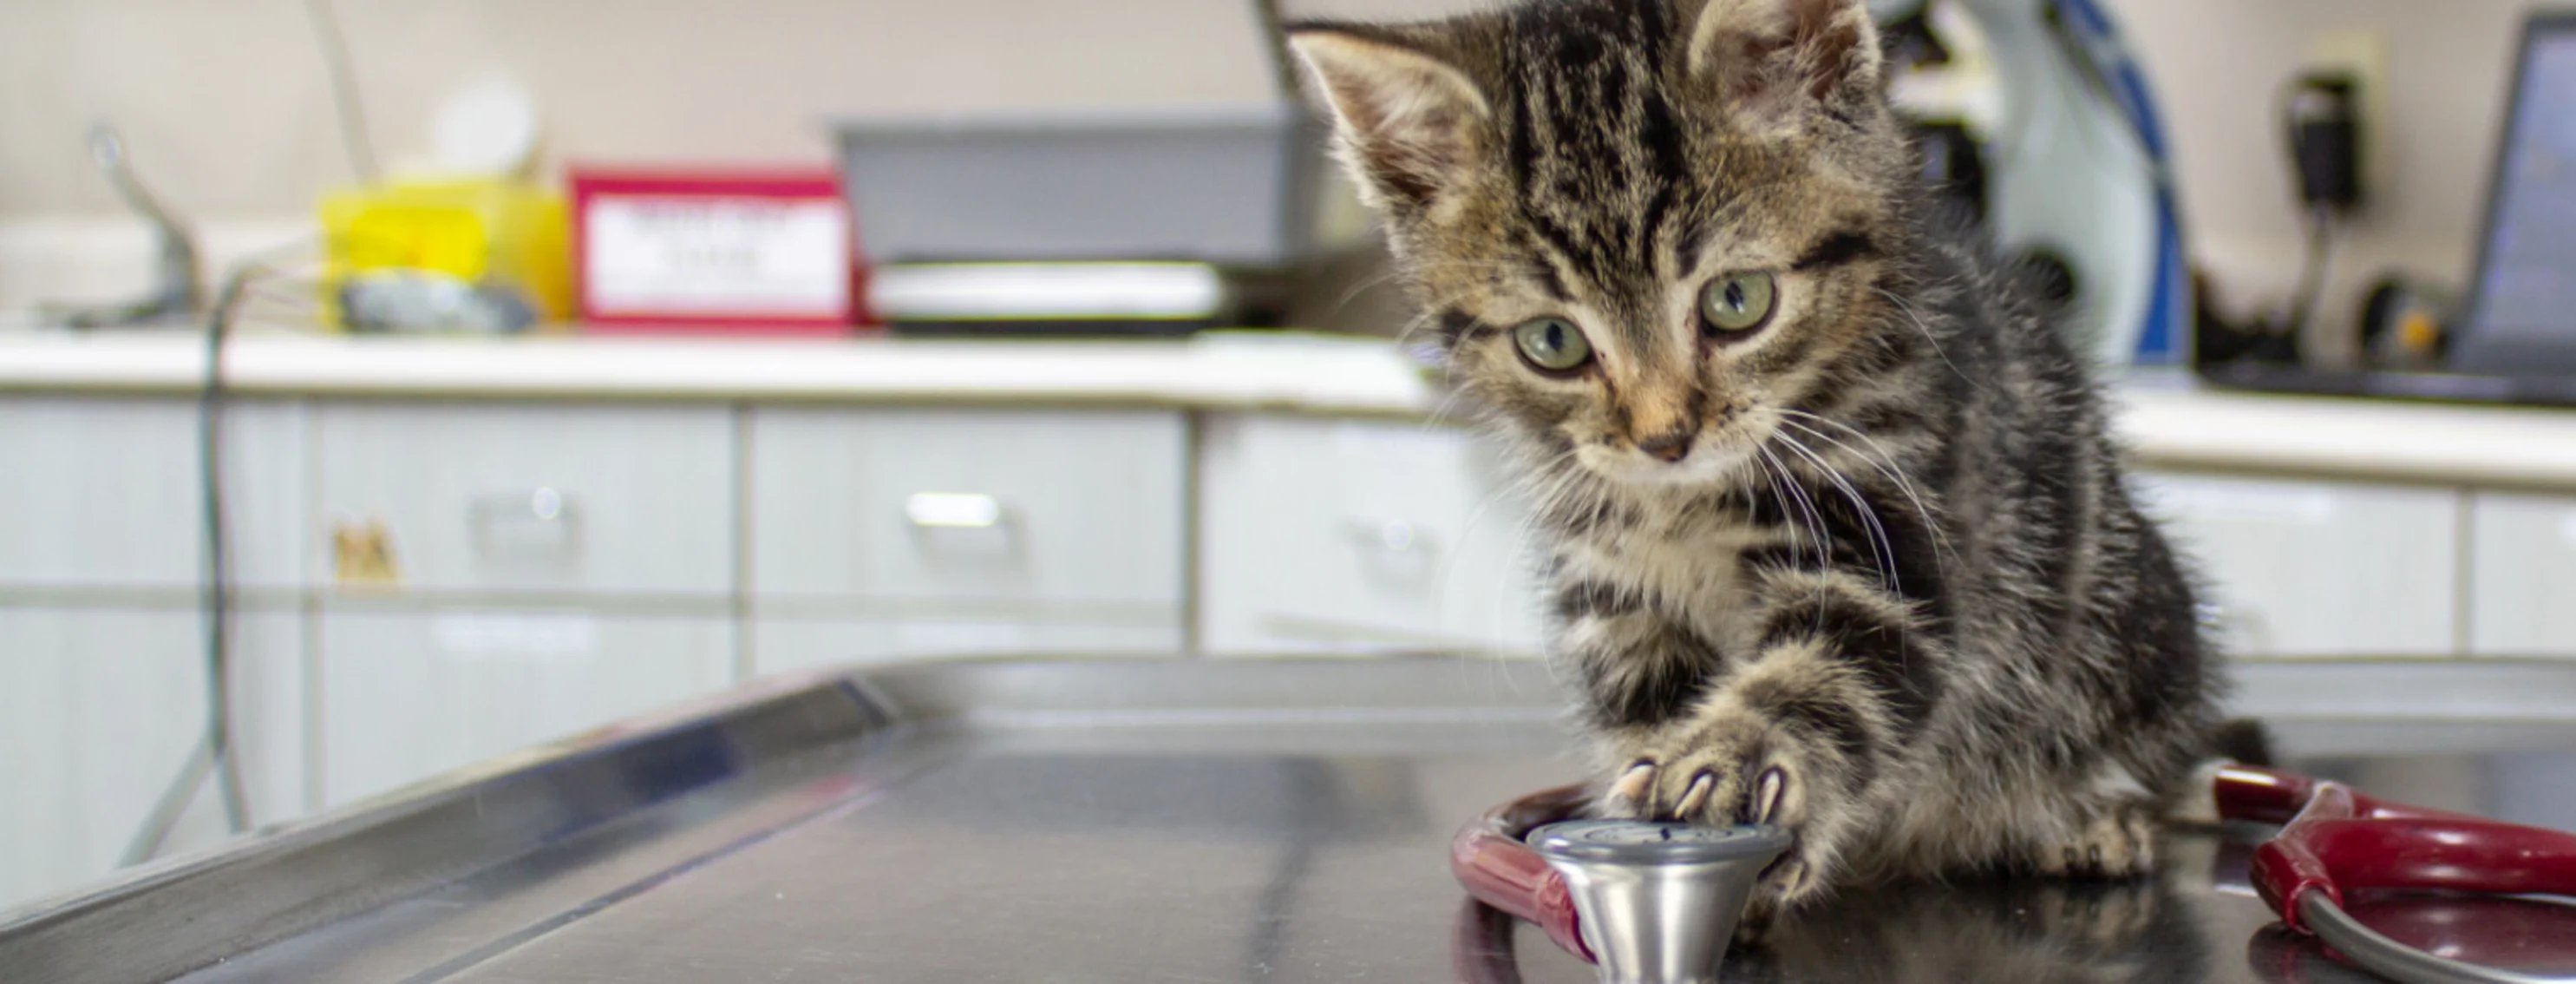 Kitten pawing at a red stethoscope on a table